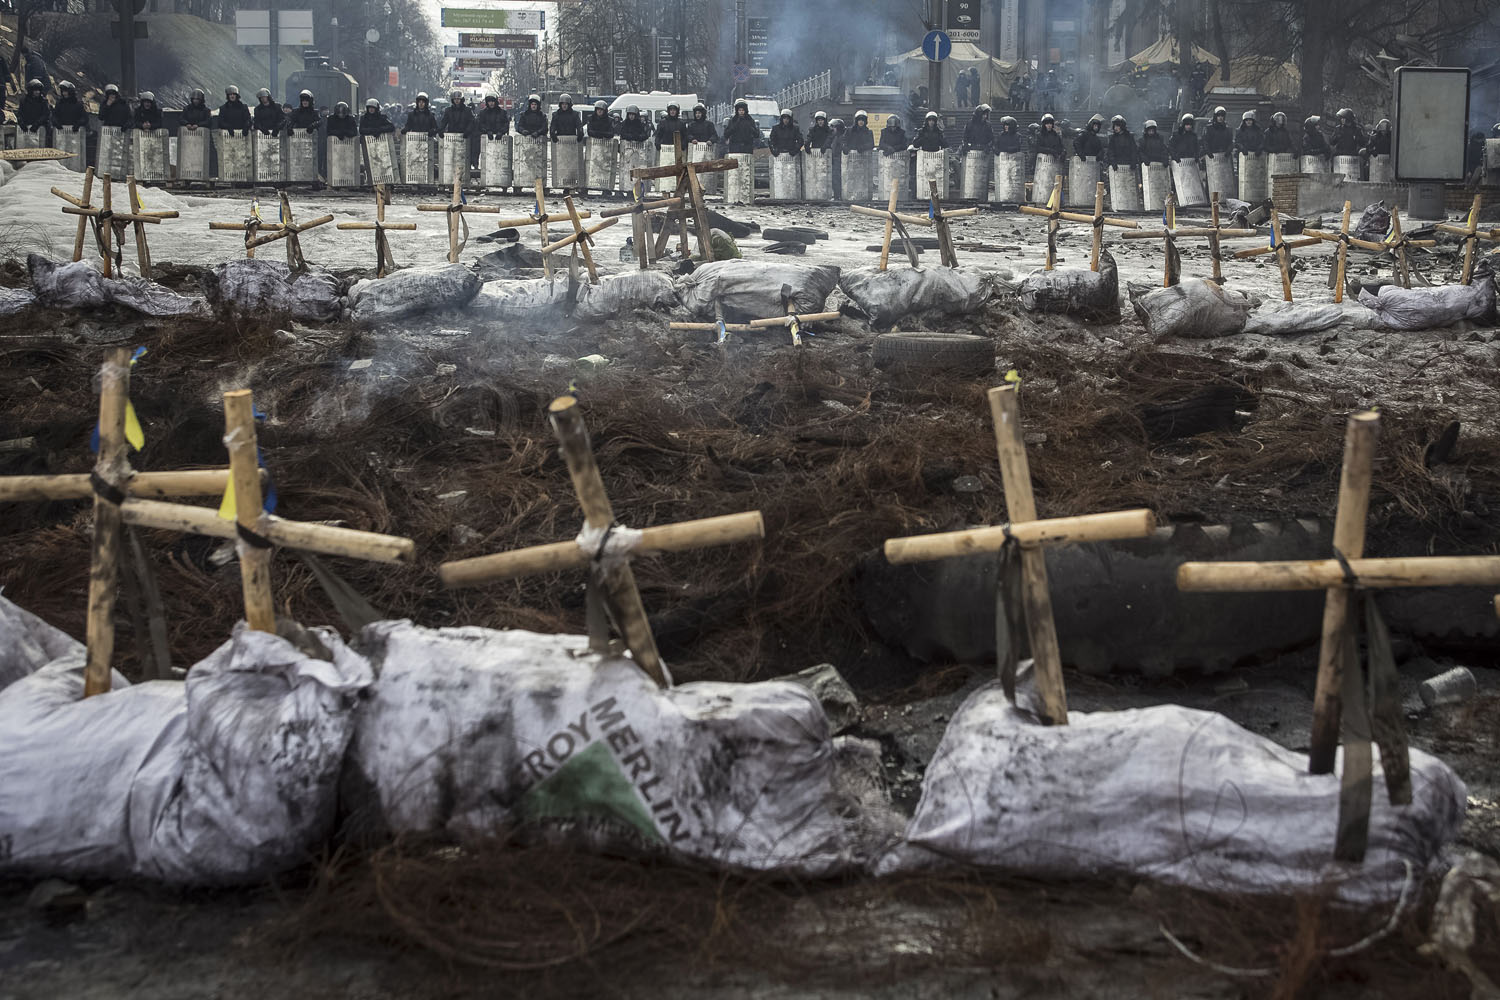 Feb. 11, 2014. Riot police stand behind crosses installed by anti-government protesters in memory of the people who have died and went missing during clashes in Ukraine, near the barricades in Kiev.